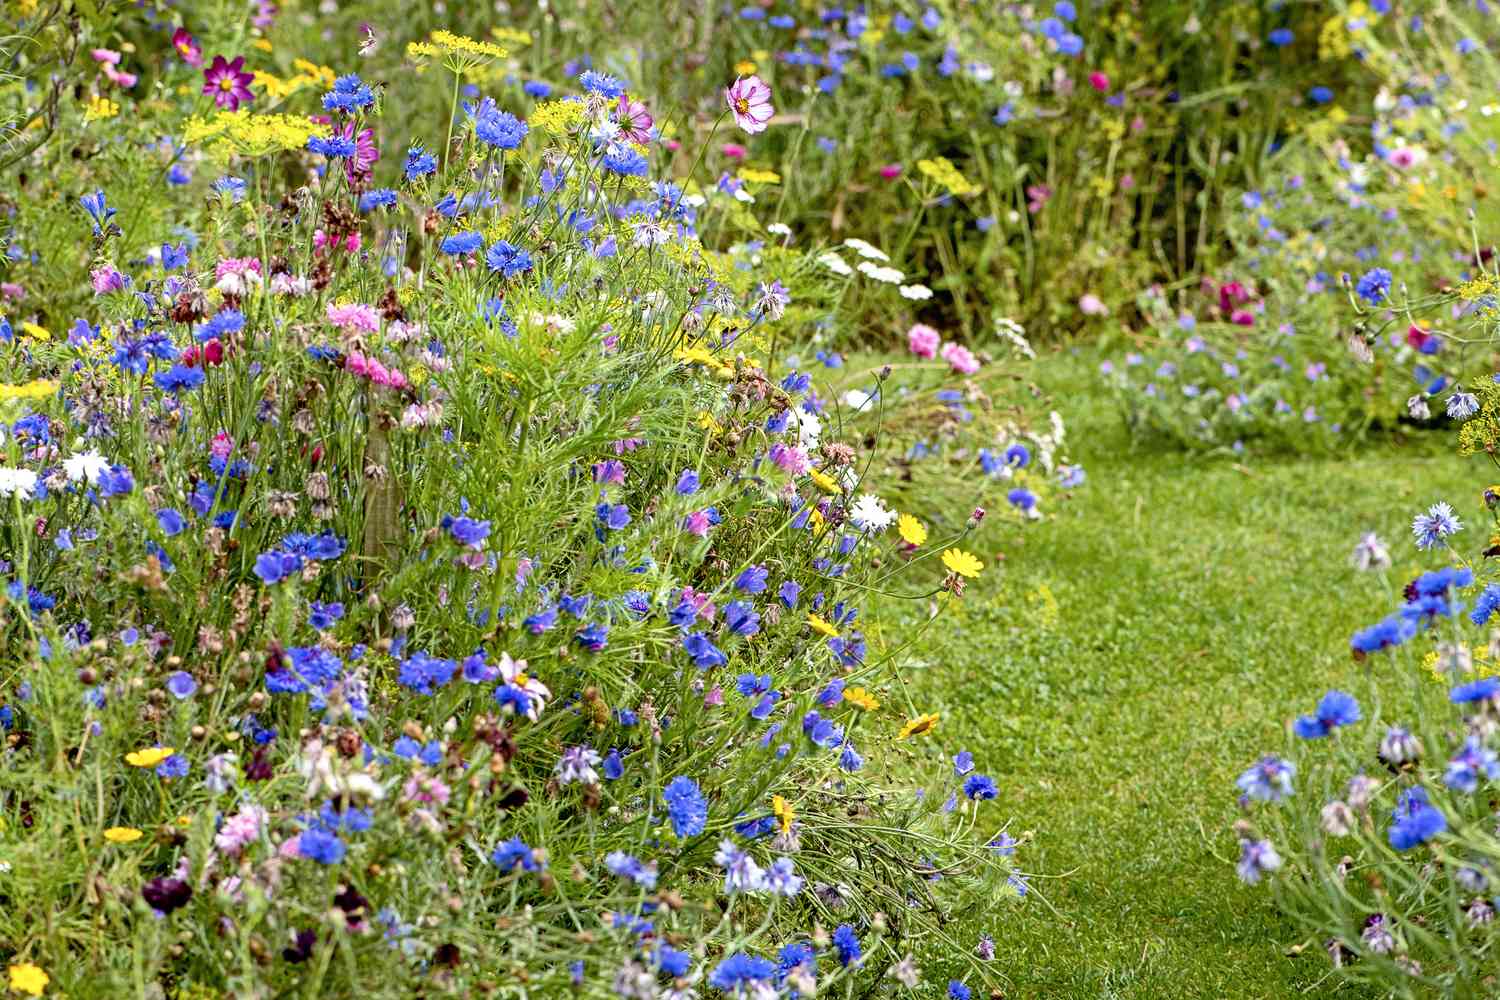 Wildflowers in and English cottage garden with a grass path, in the soft summer sunshine